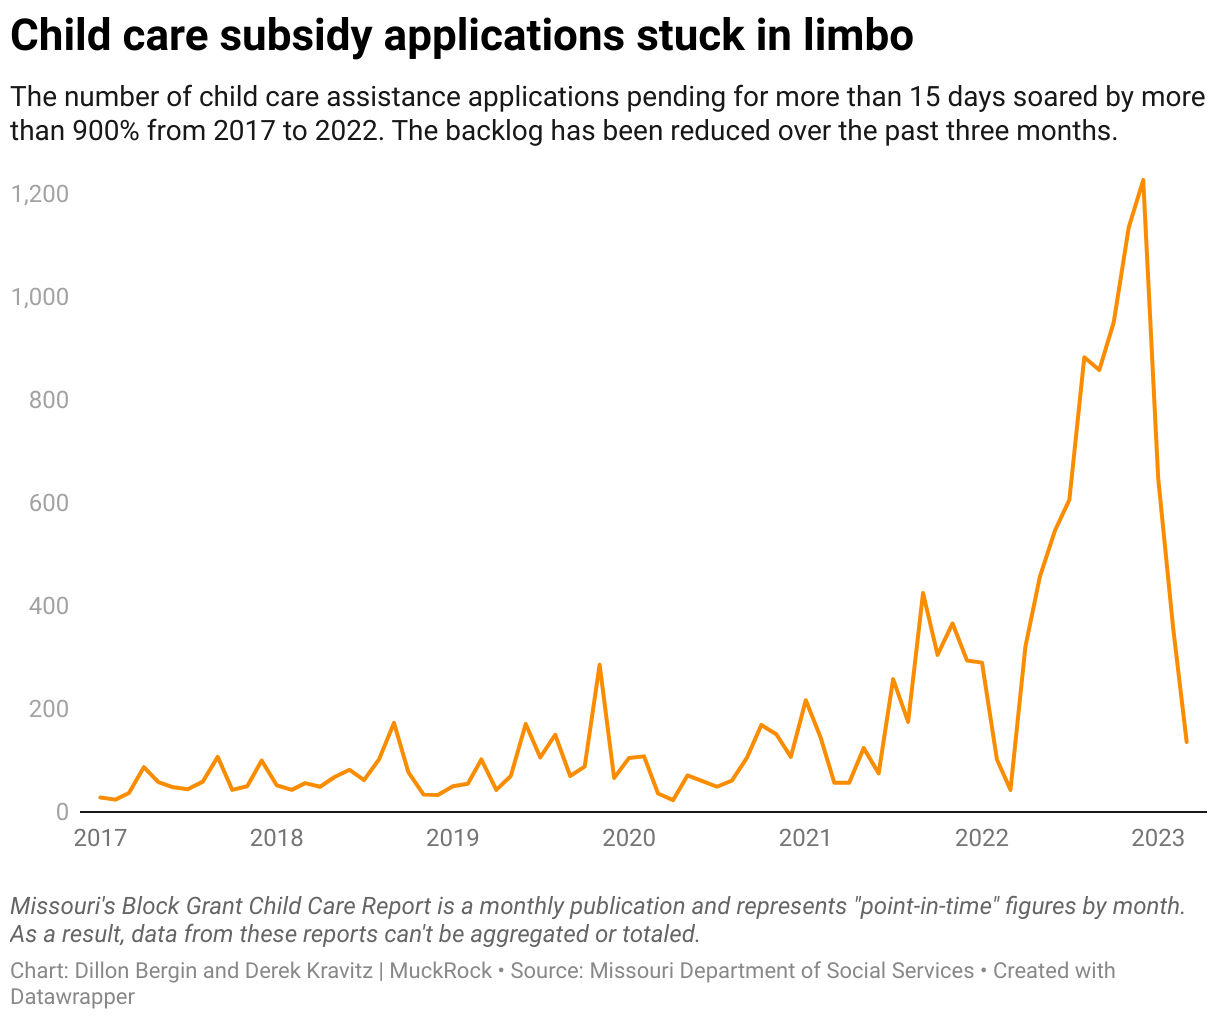 An orange line shows the change over time in child care assistance applications that are pending. The number starts very low in 2017 at 28 applications, spikes during the pandemic at 286 applications and continues to rise, before it sky rockets in 2022 to over 1,200 applications. 